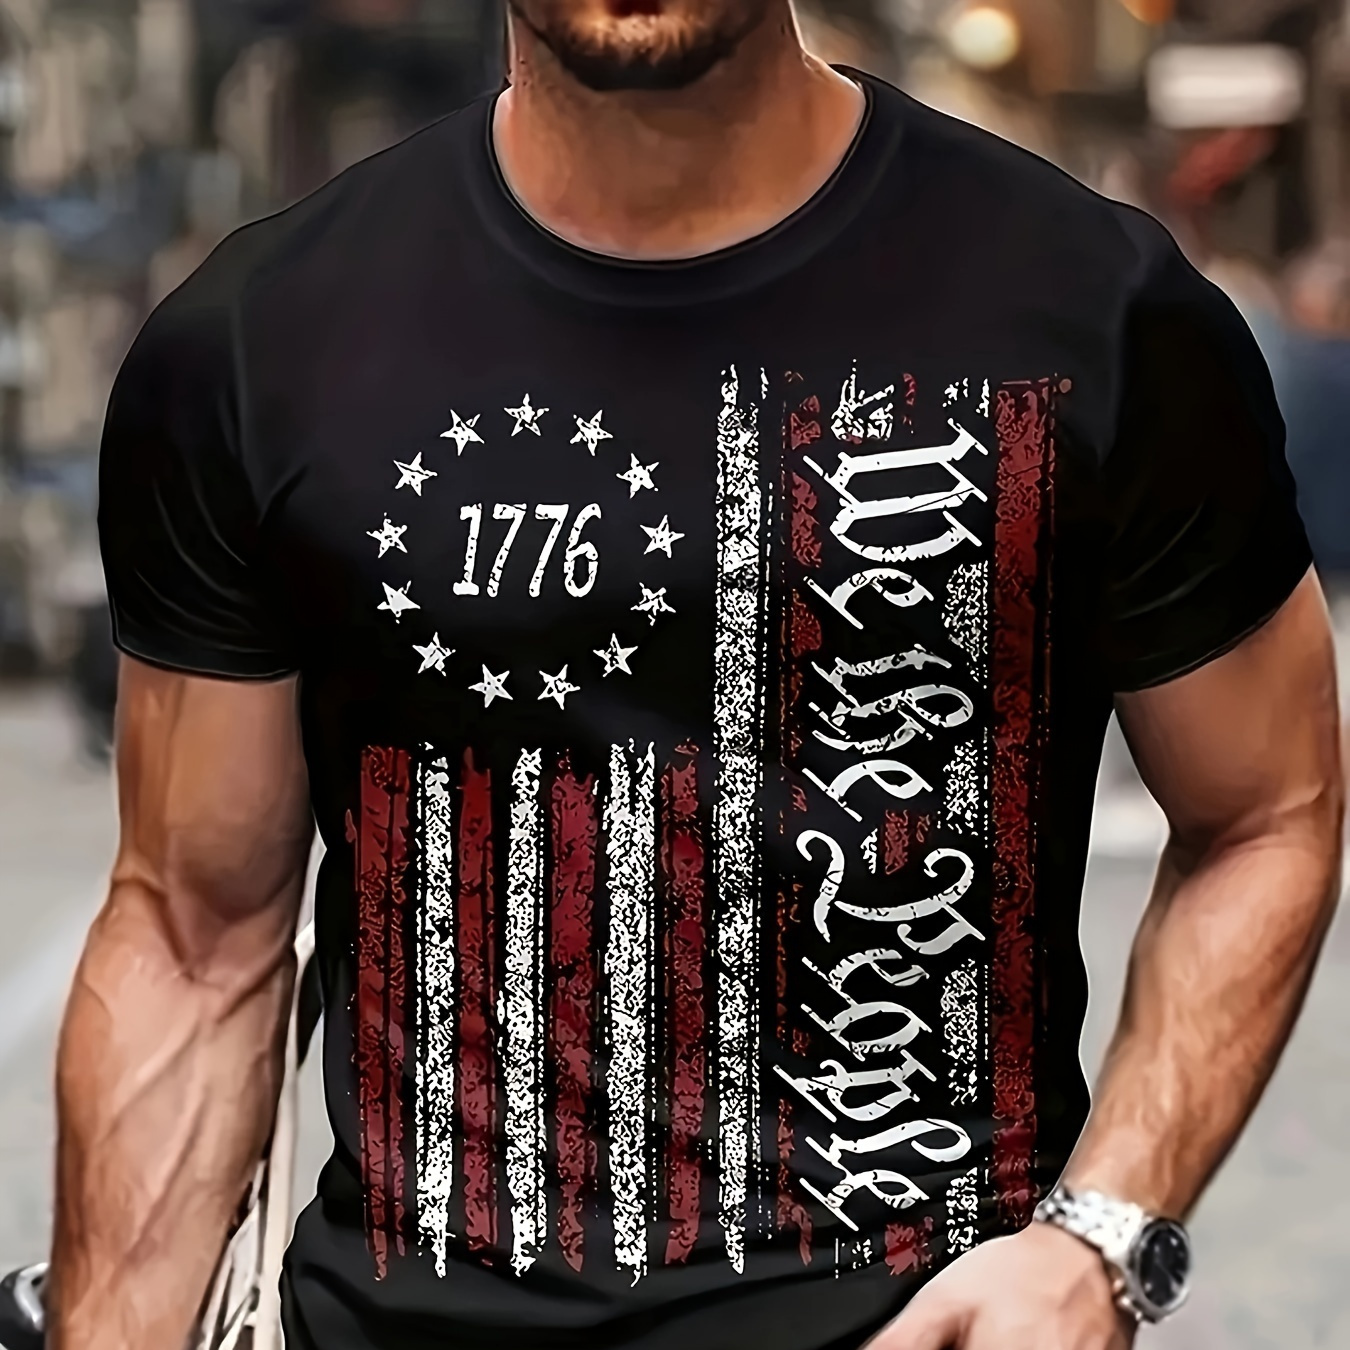 

Men's Chic And Stylish American Flag Pattern And Letter Print "we The People" T-shirt, Crew Neck And Short Sleeve Tops For Summer Outdoors Wear